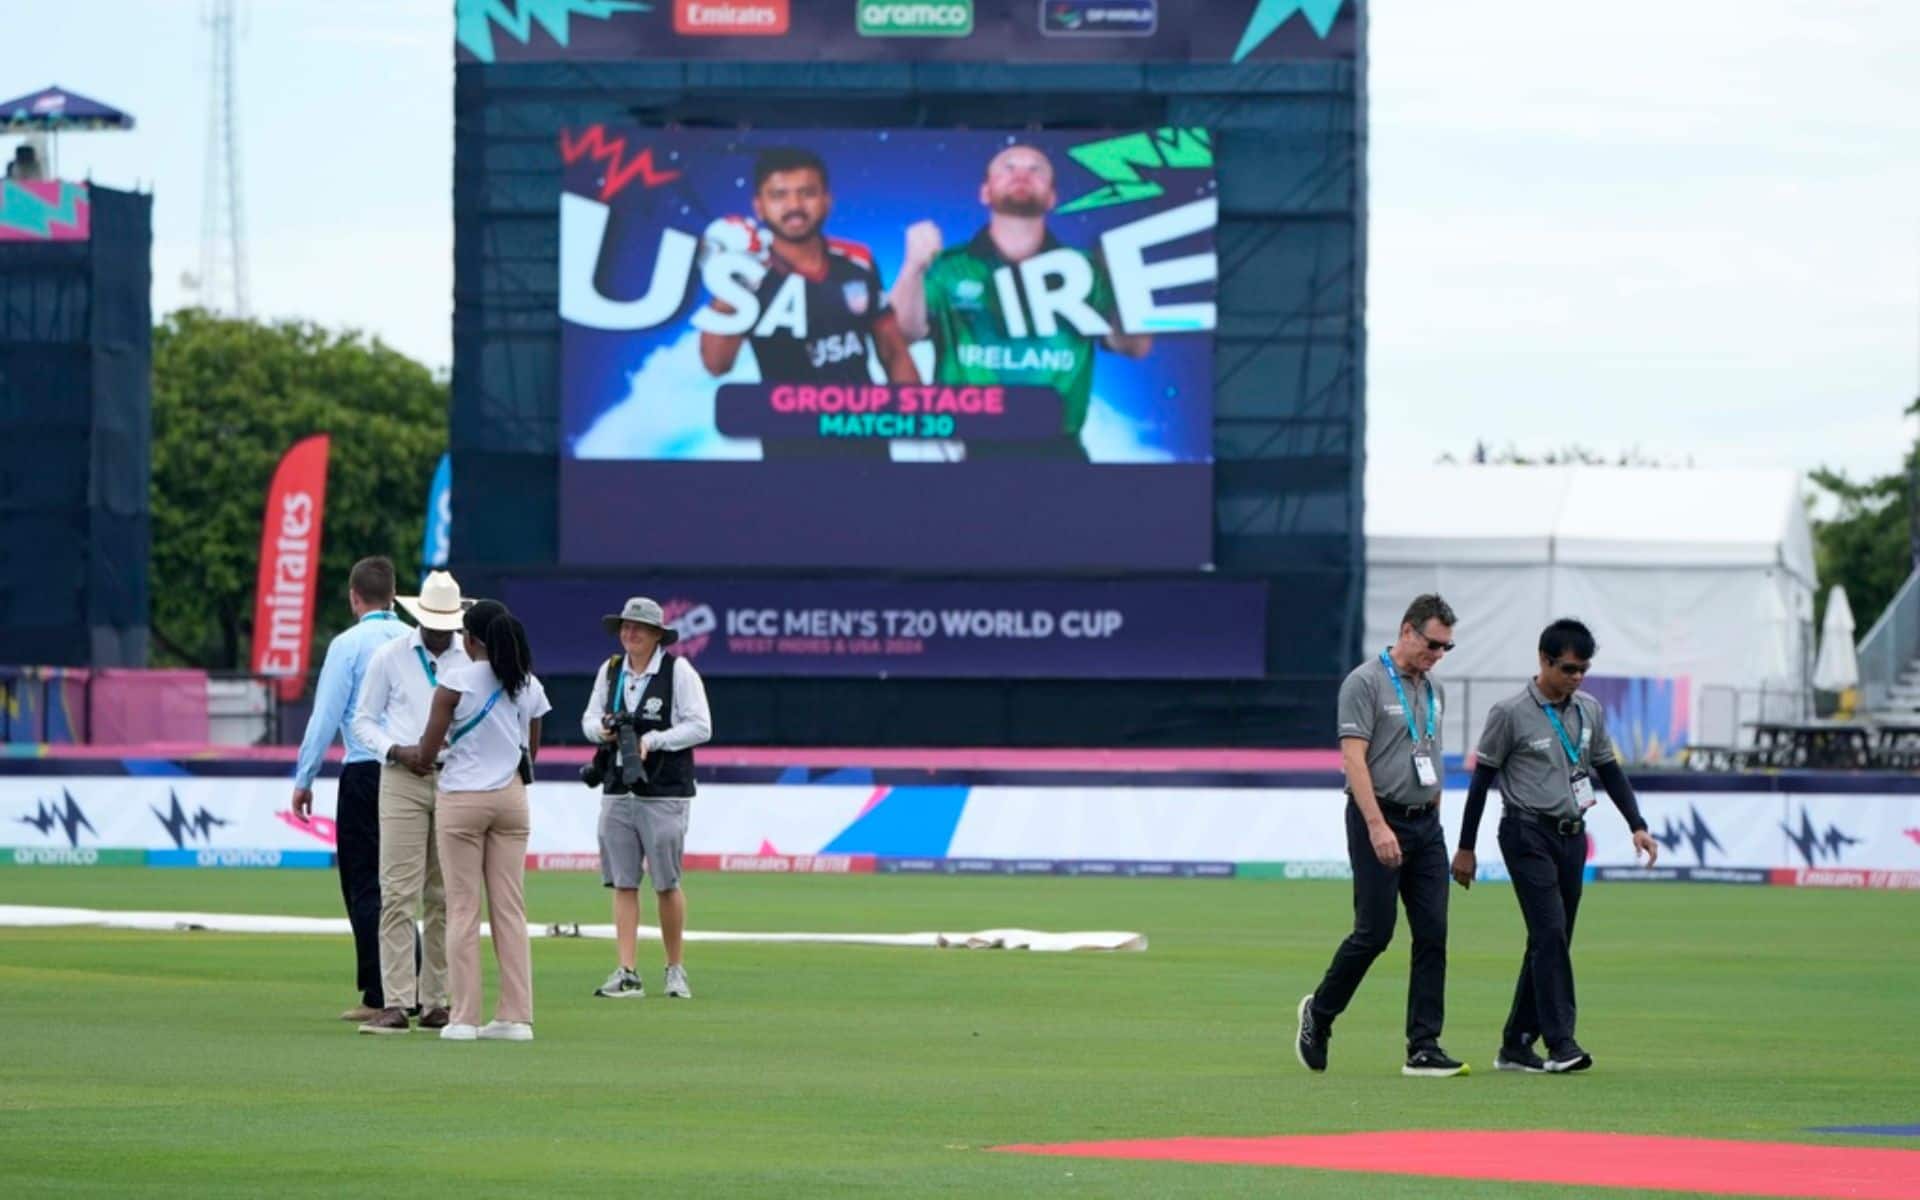 Good News For Pakistan! USA Vs IRE Not Called Off With Next Inspection Set For...